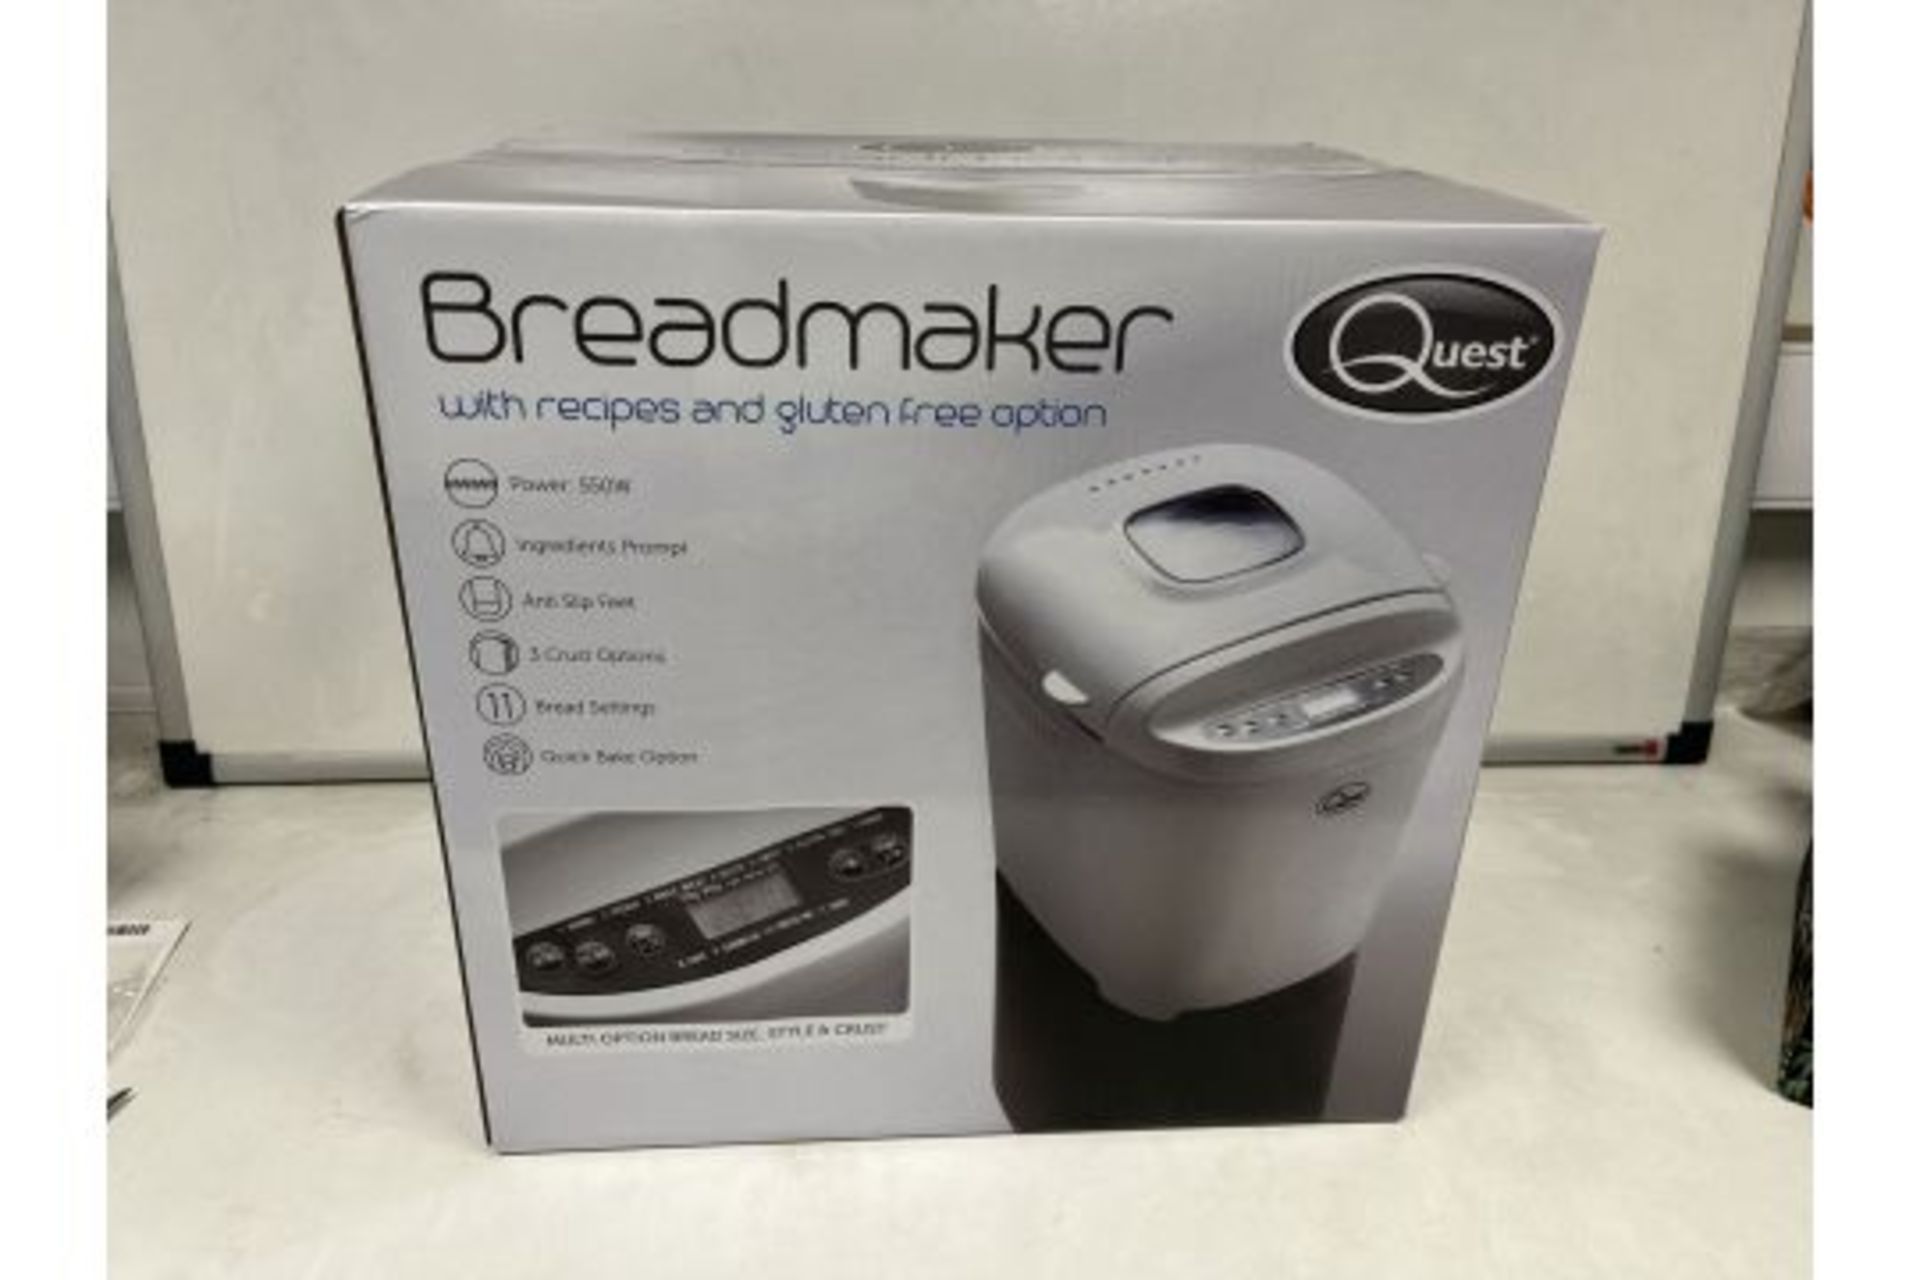 BRAND NEW QUEST 550W BREAD MAKER WITH ANTI SLIP FEET, 3 CRUST OPTIONS, BREAD SETTINGS, QUICK BAKE